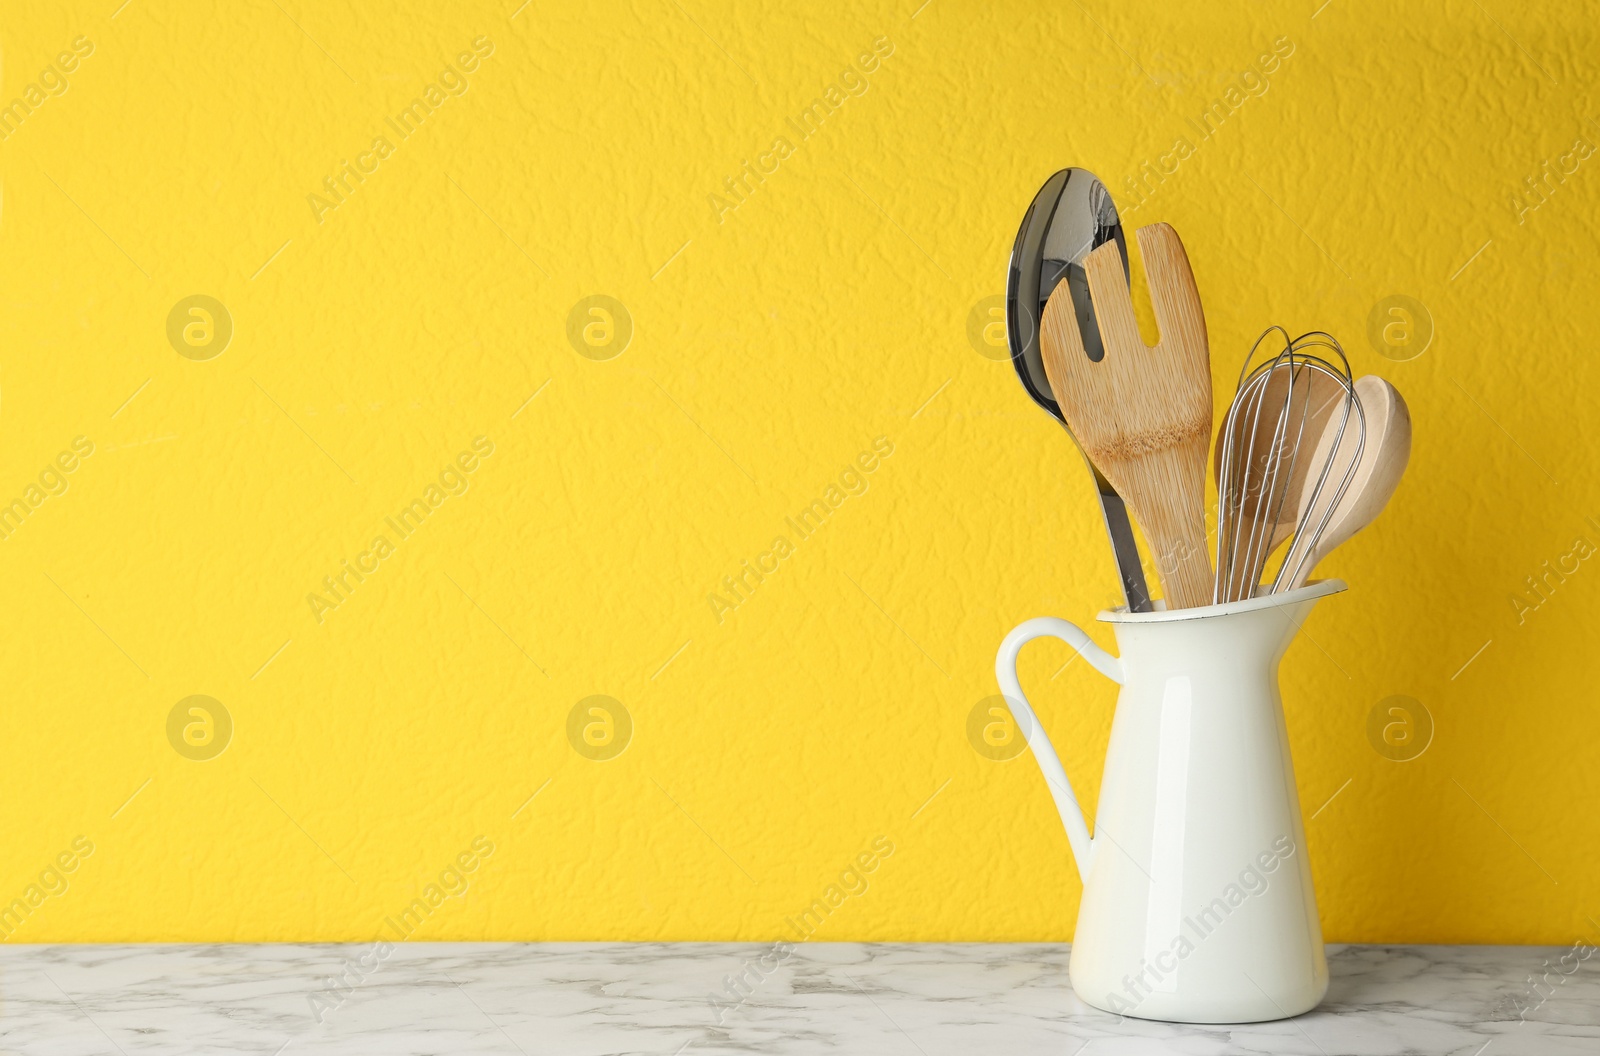 Photo of Jug with kitchen utensils on marble table against yellow background. Space for text